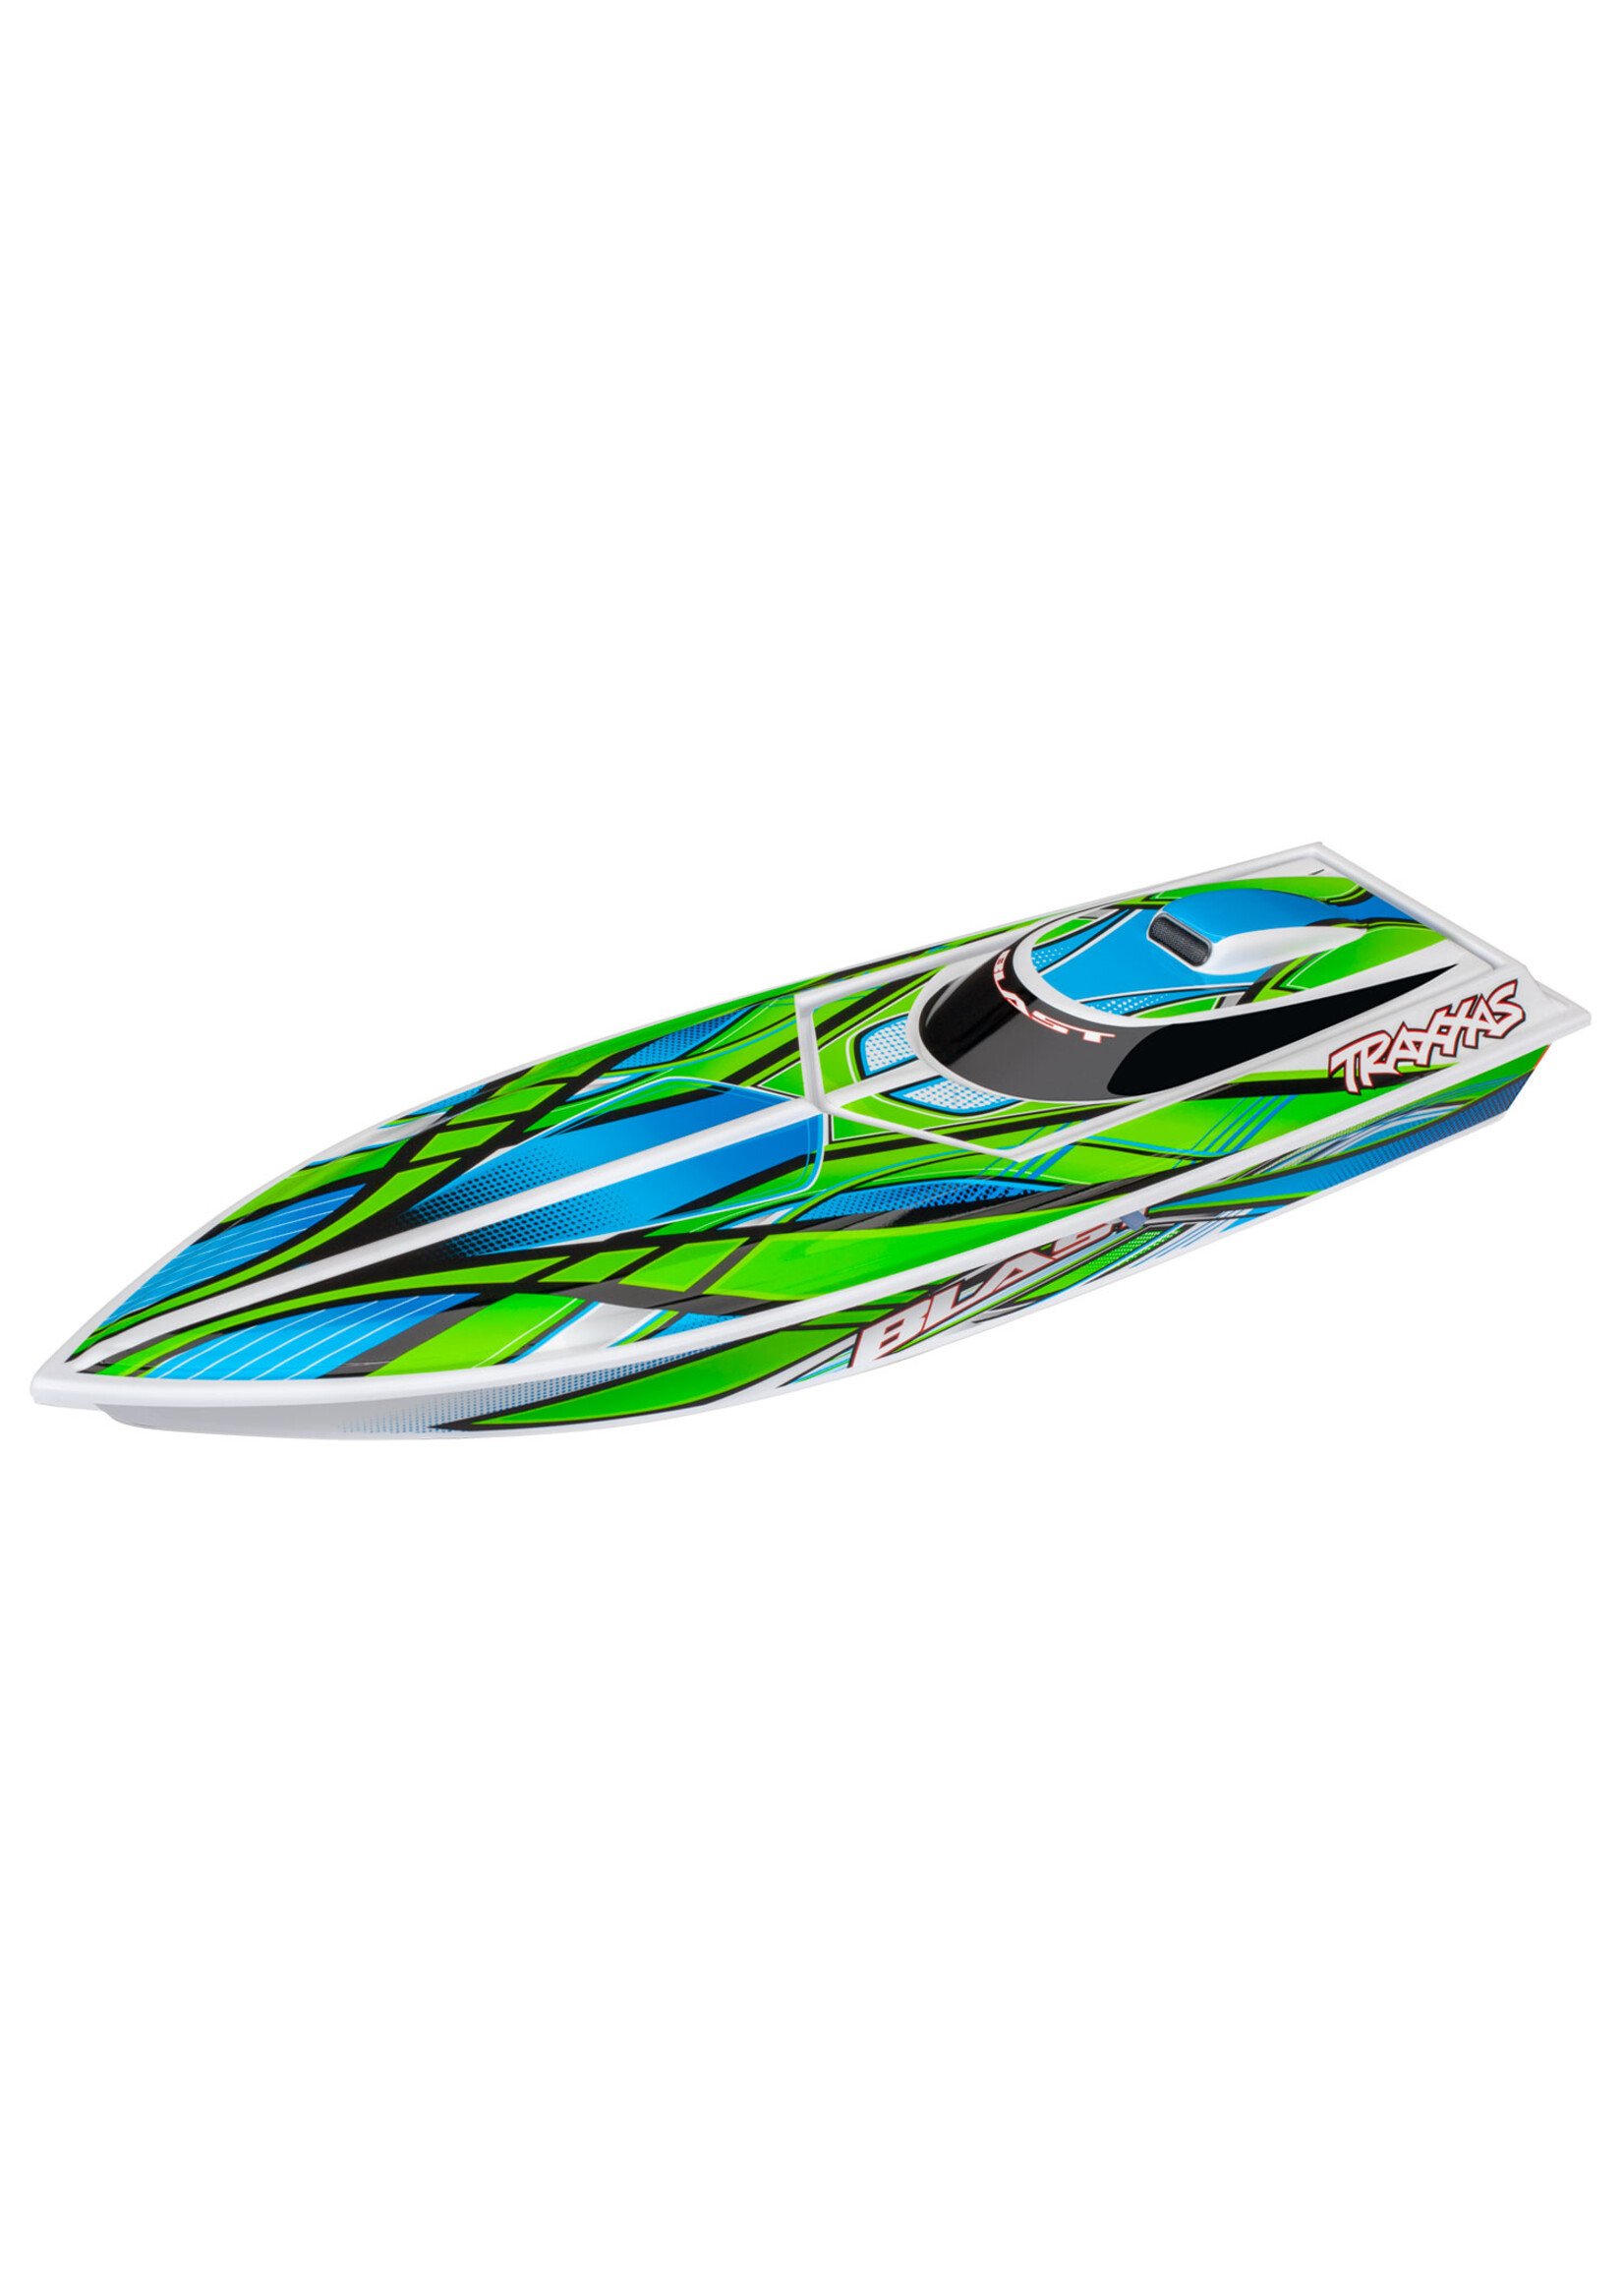 Traxxas 1/10 Blast Race Boat With USB-C Charger - Green